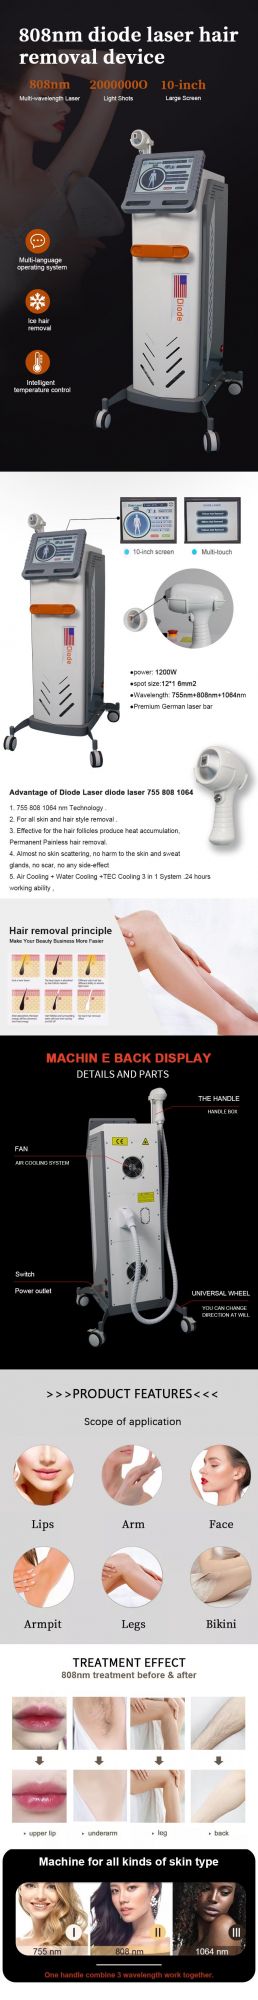 Perment Painless 808nm Diode Laser Hair Removal Machine